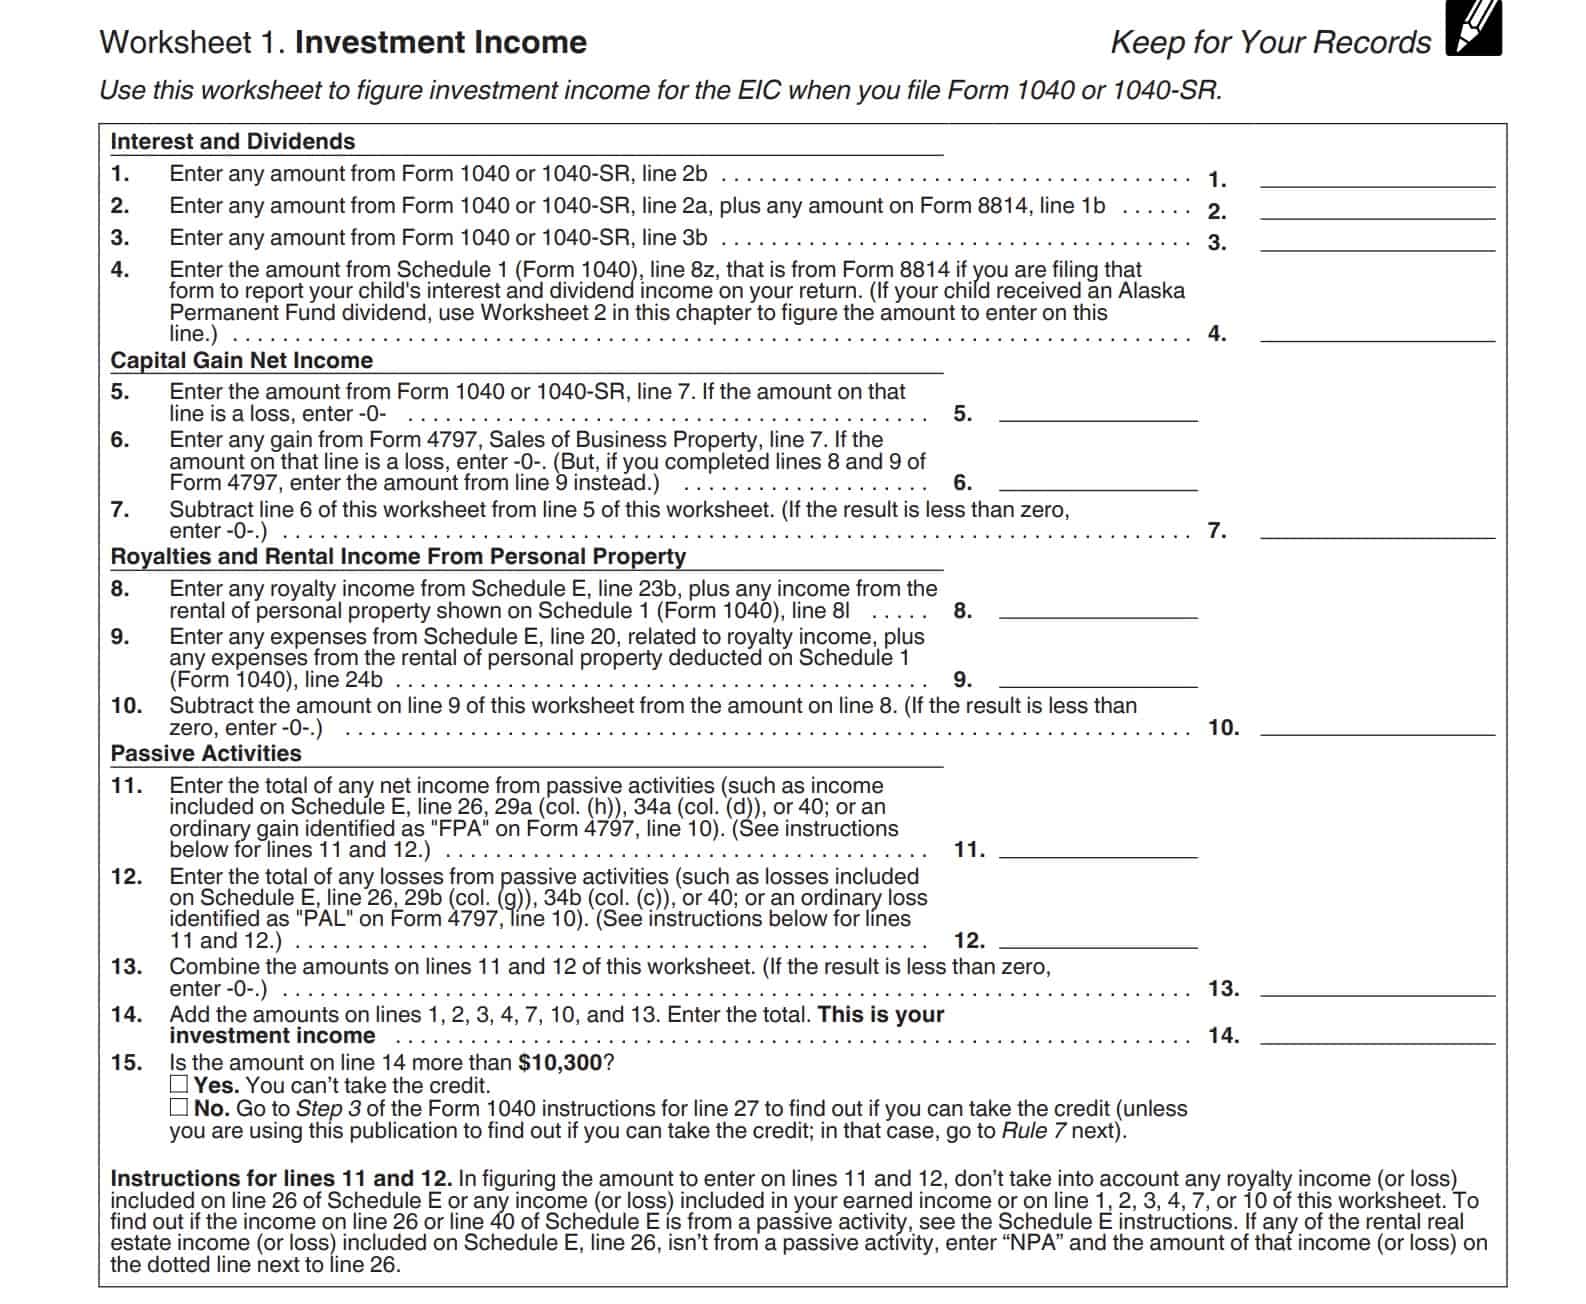 EIC investment income worksheet